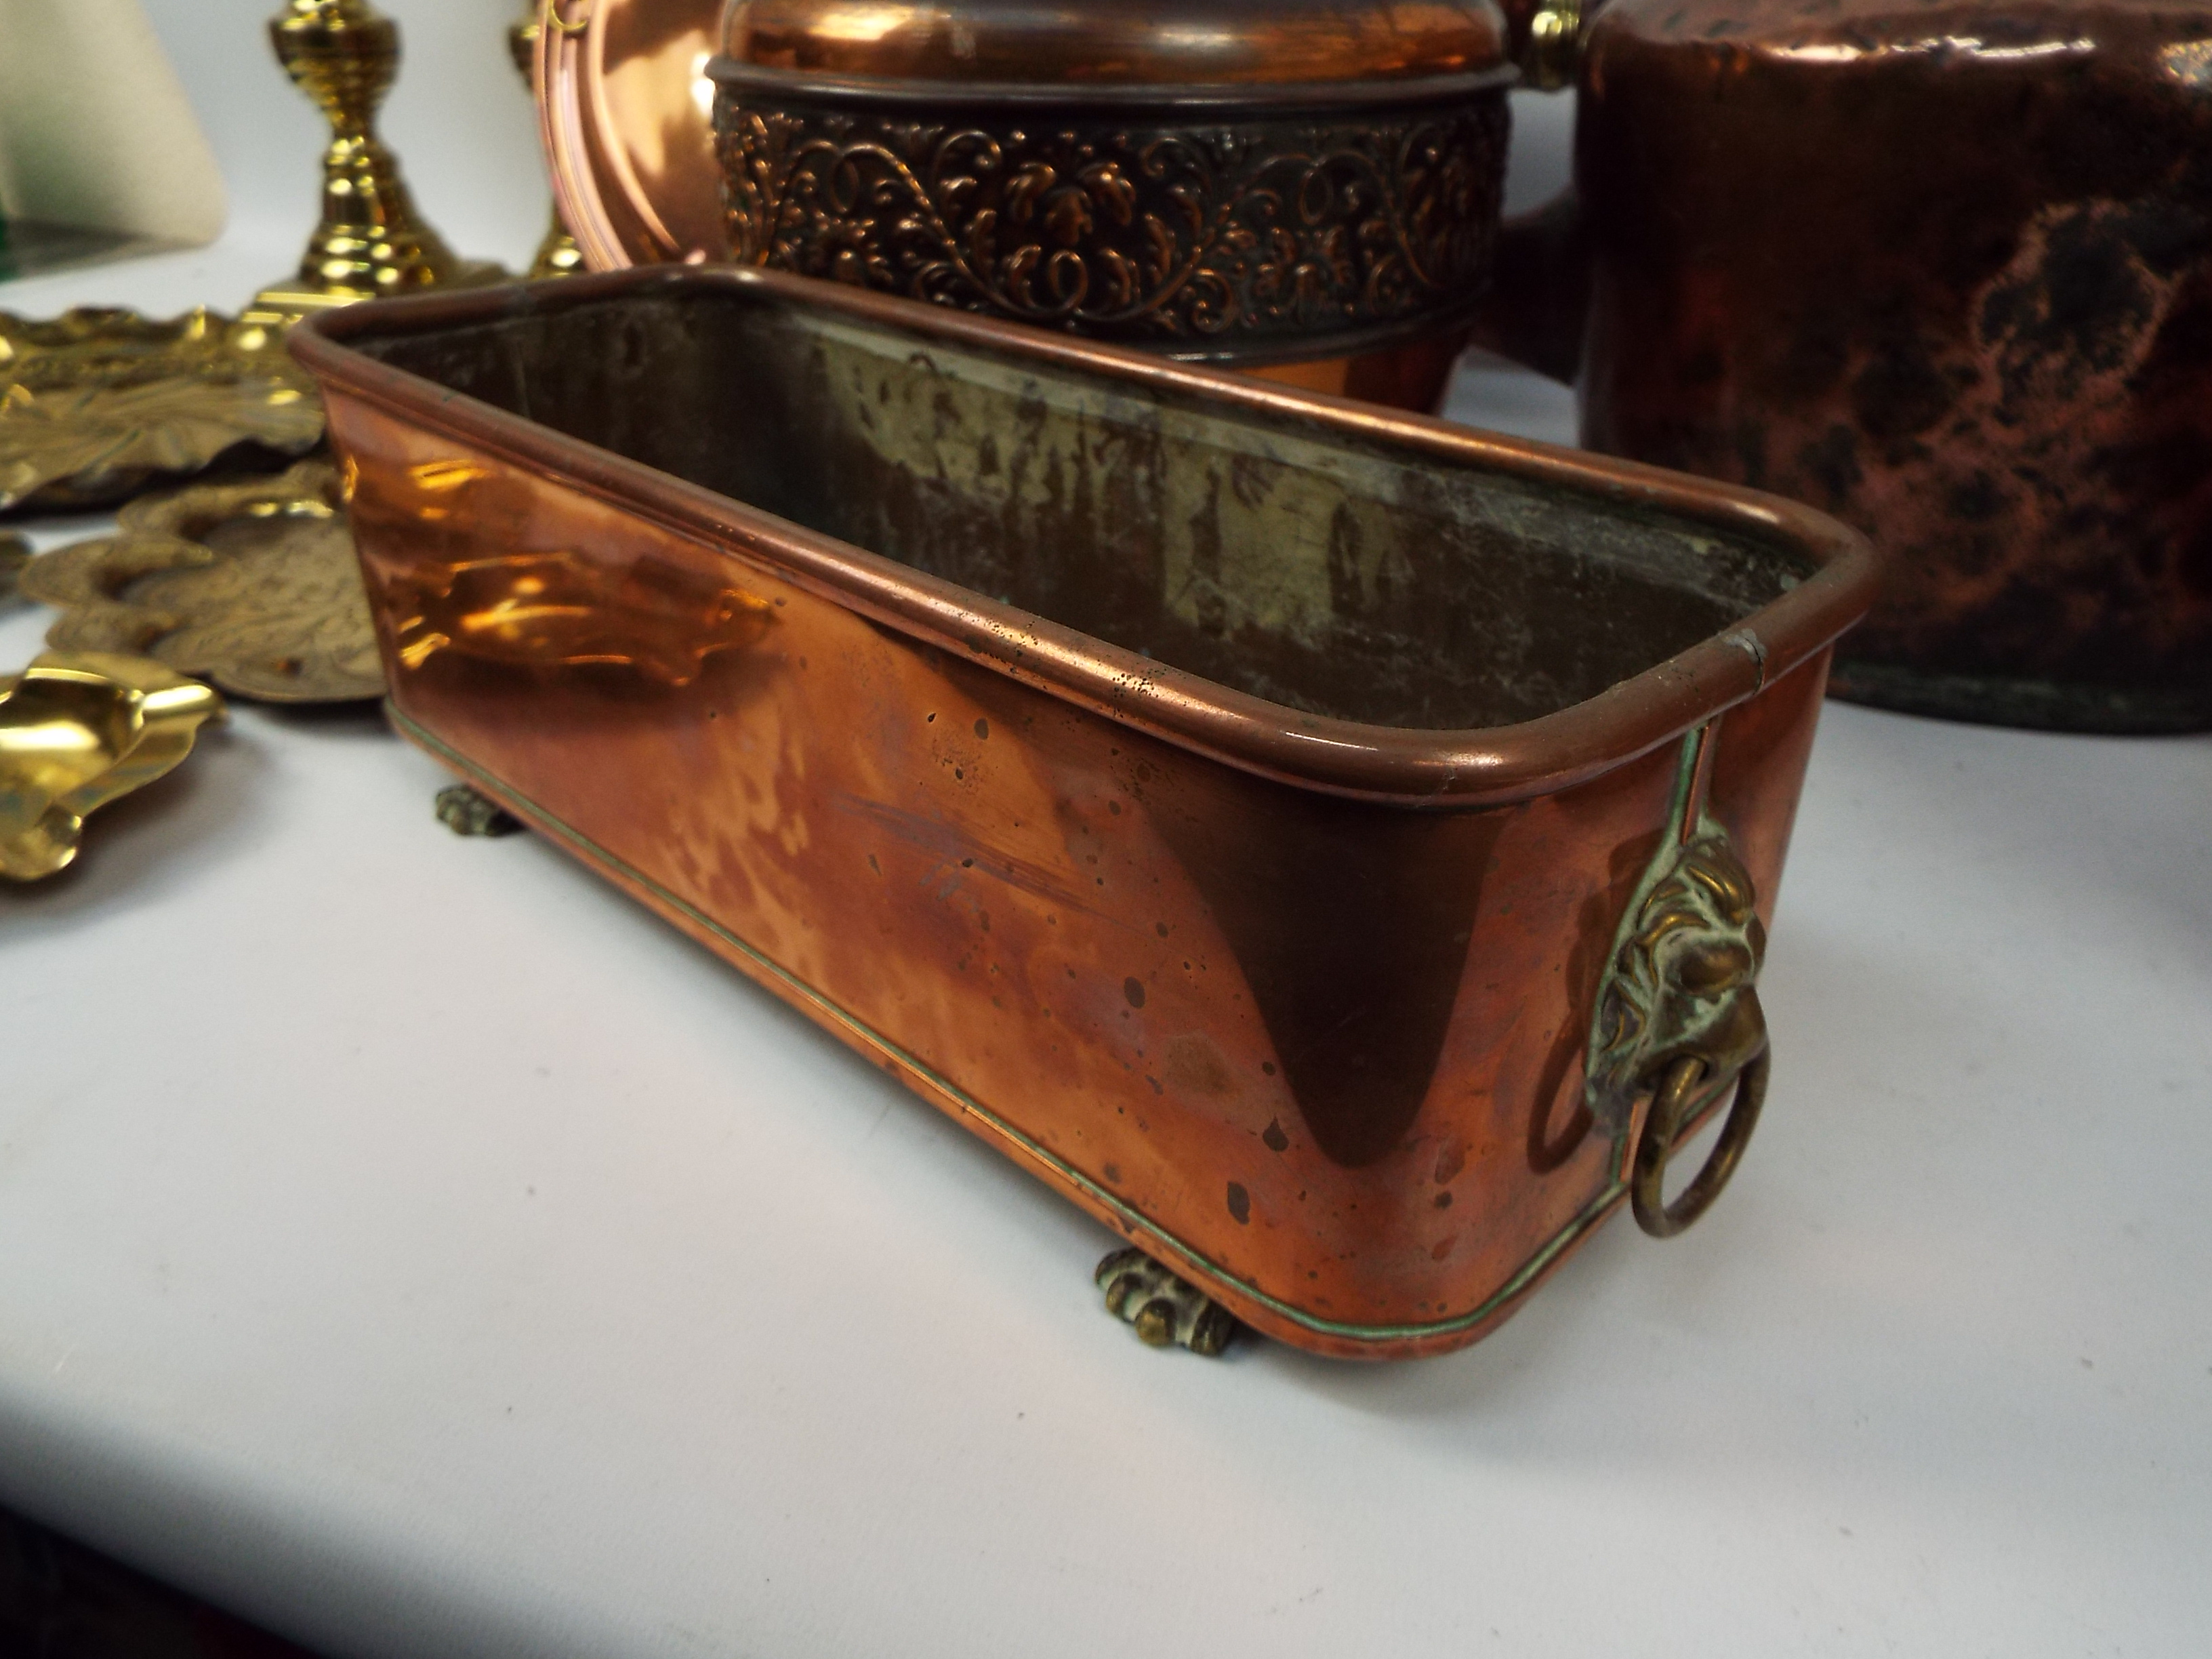 A collection of copper and brassware to include kettles, candlesticks, planters and similar. - Image 5 of 5